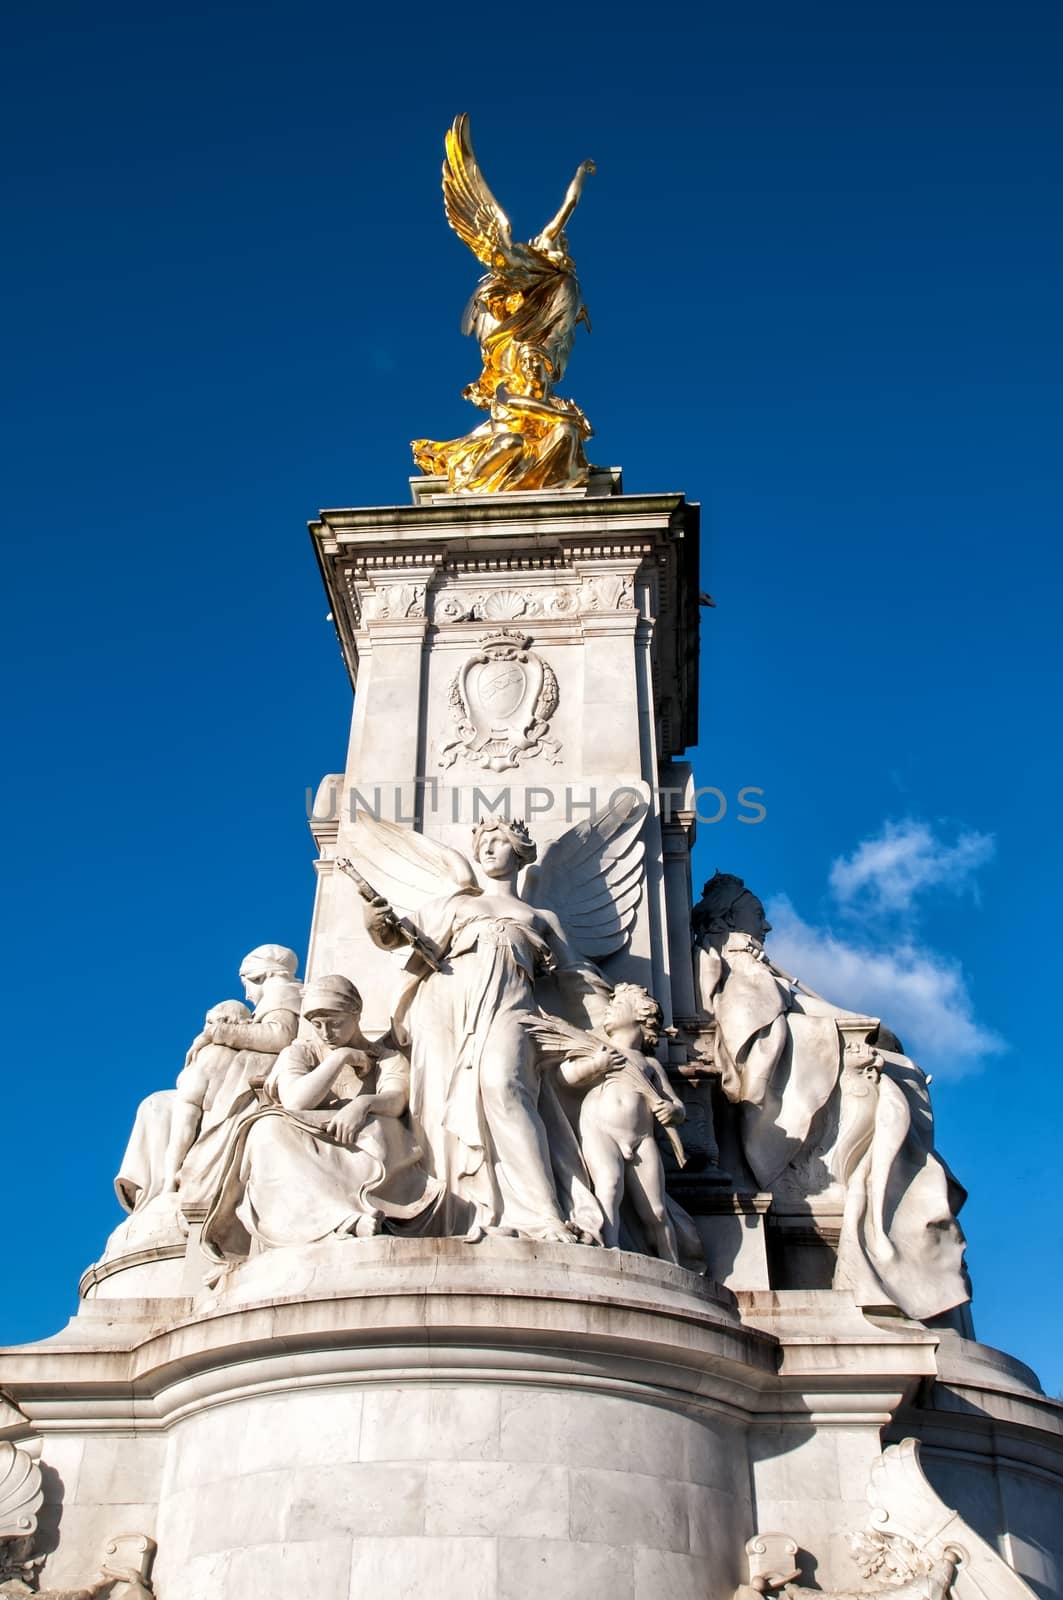 The Victoria Memorial is a sculpture dedicated to Queen Victoria, sculpted by Sir Thomas Brock in London, placed at the centre of Queen's Gardens in front of Buckingham Palace.